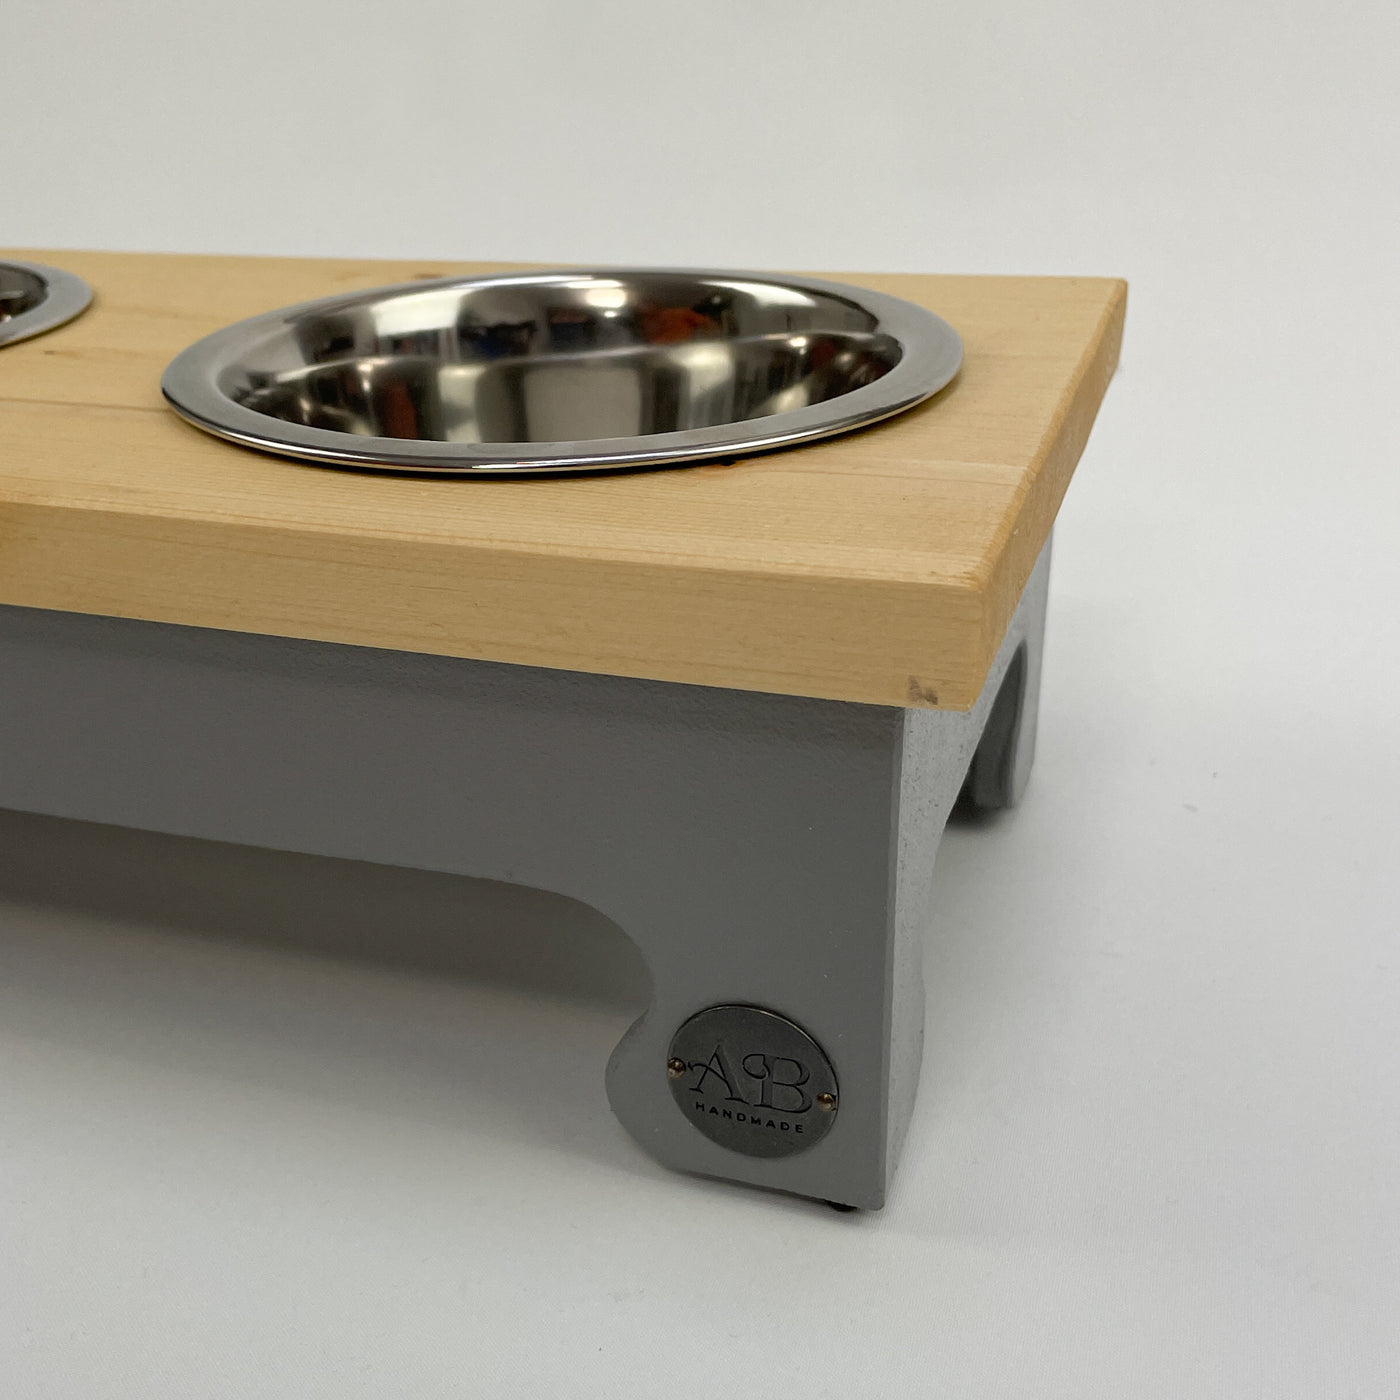 Pine Top Raised Dog Bowl Feeding Stand in grey.